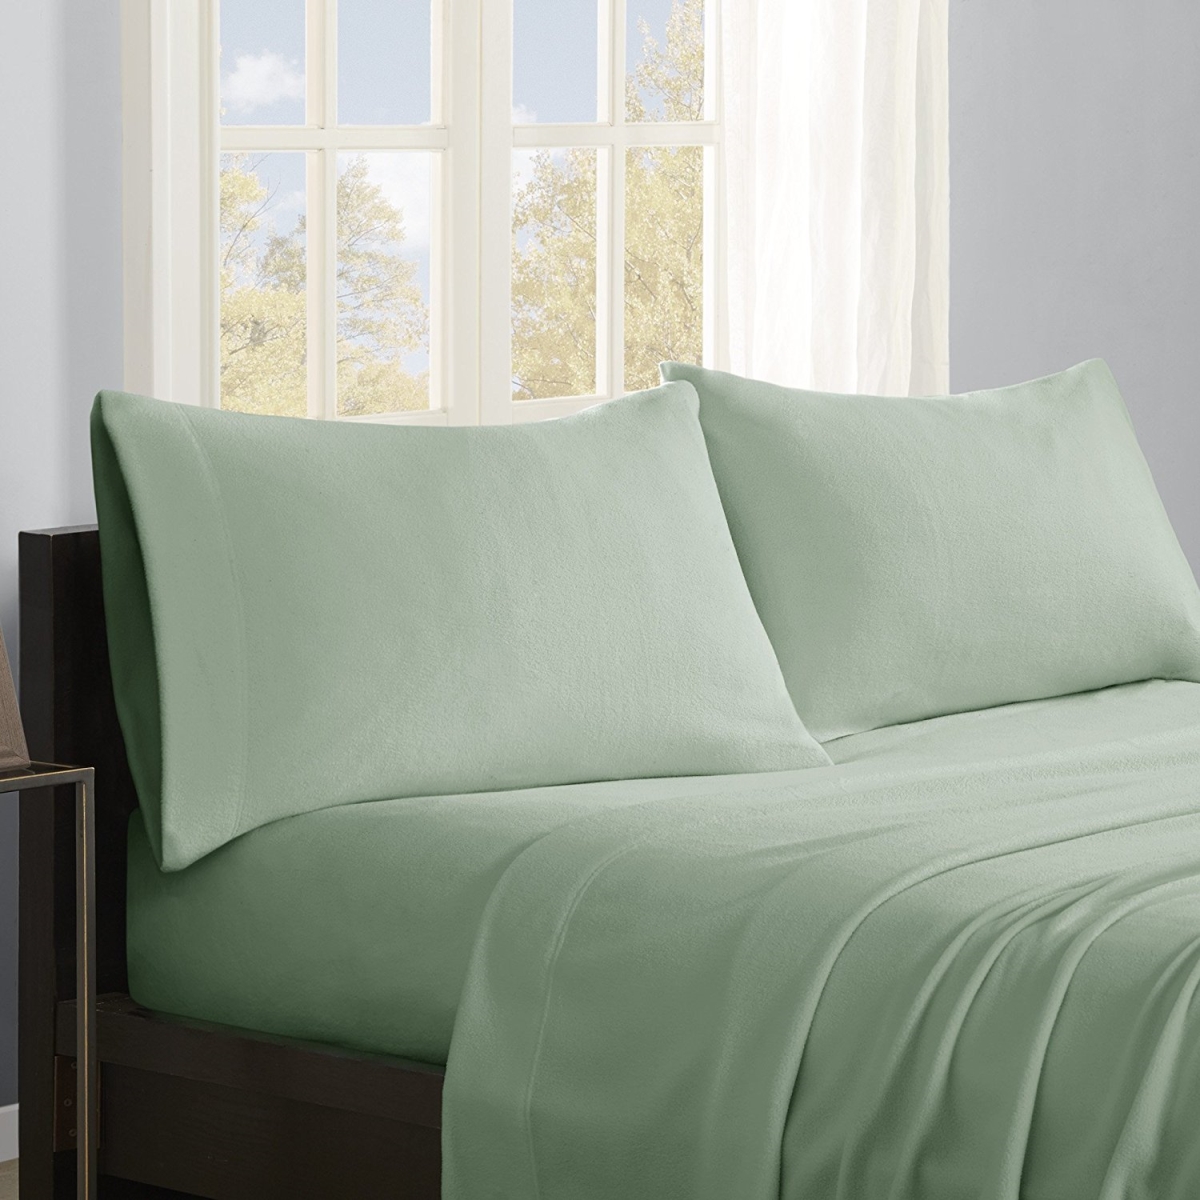 Picture of True North PC20-006 Micro Fleece Sheet Set - Full, Green